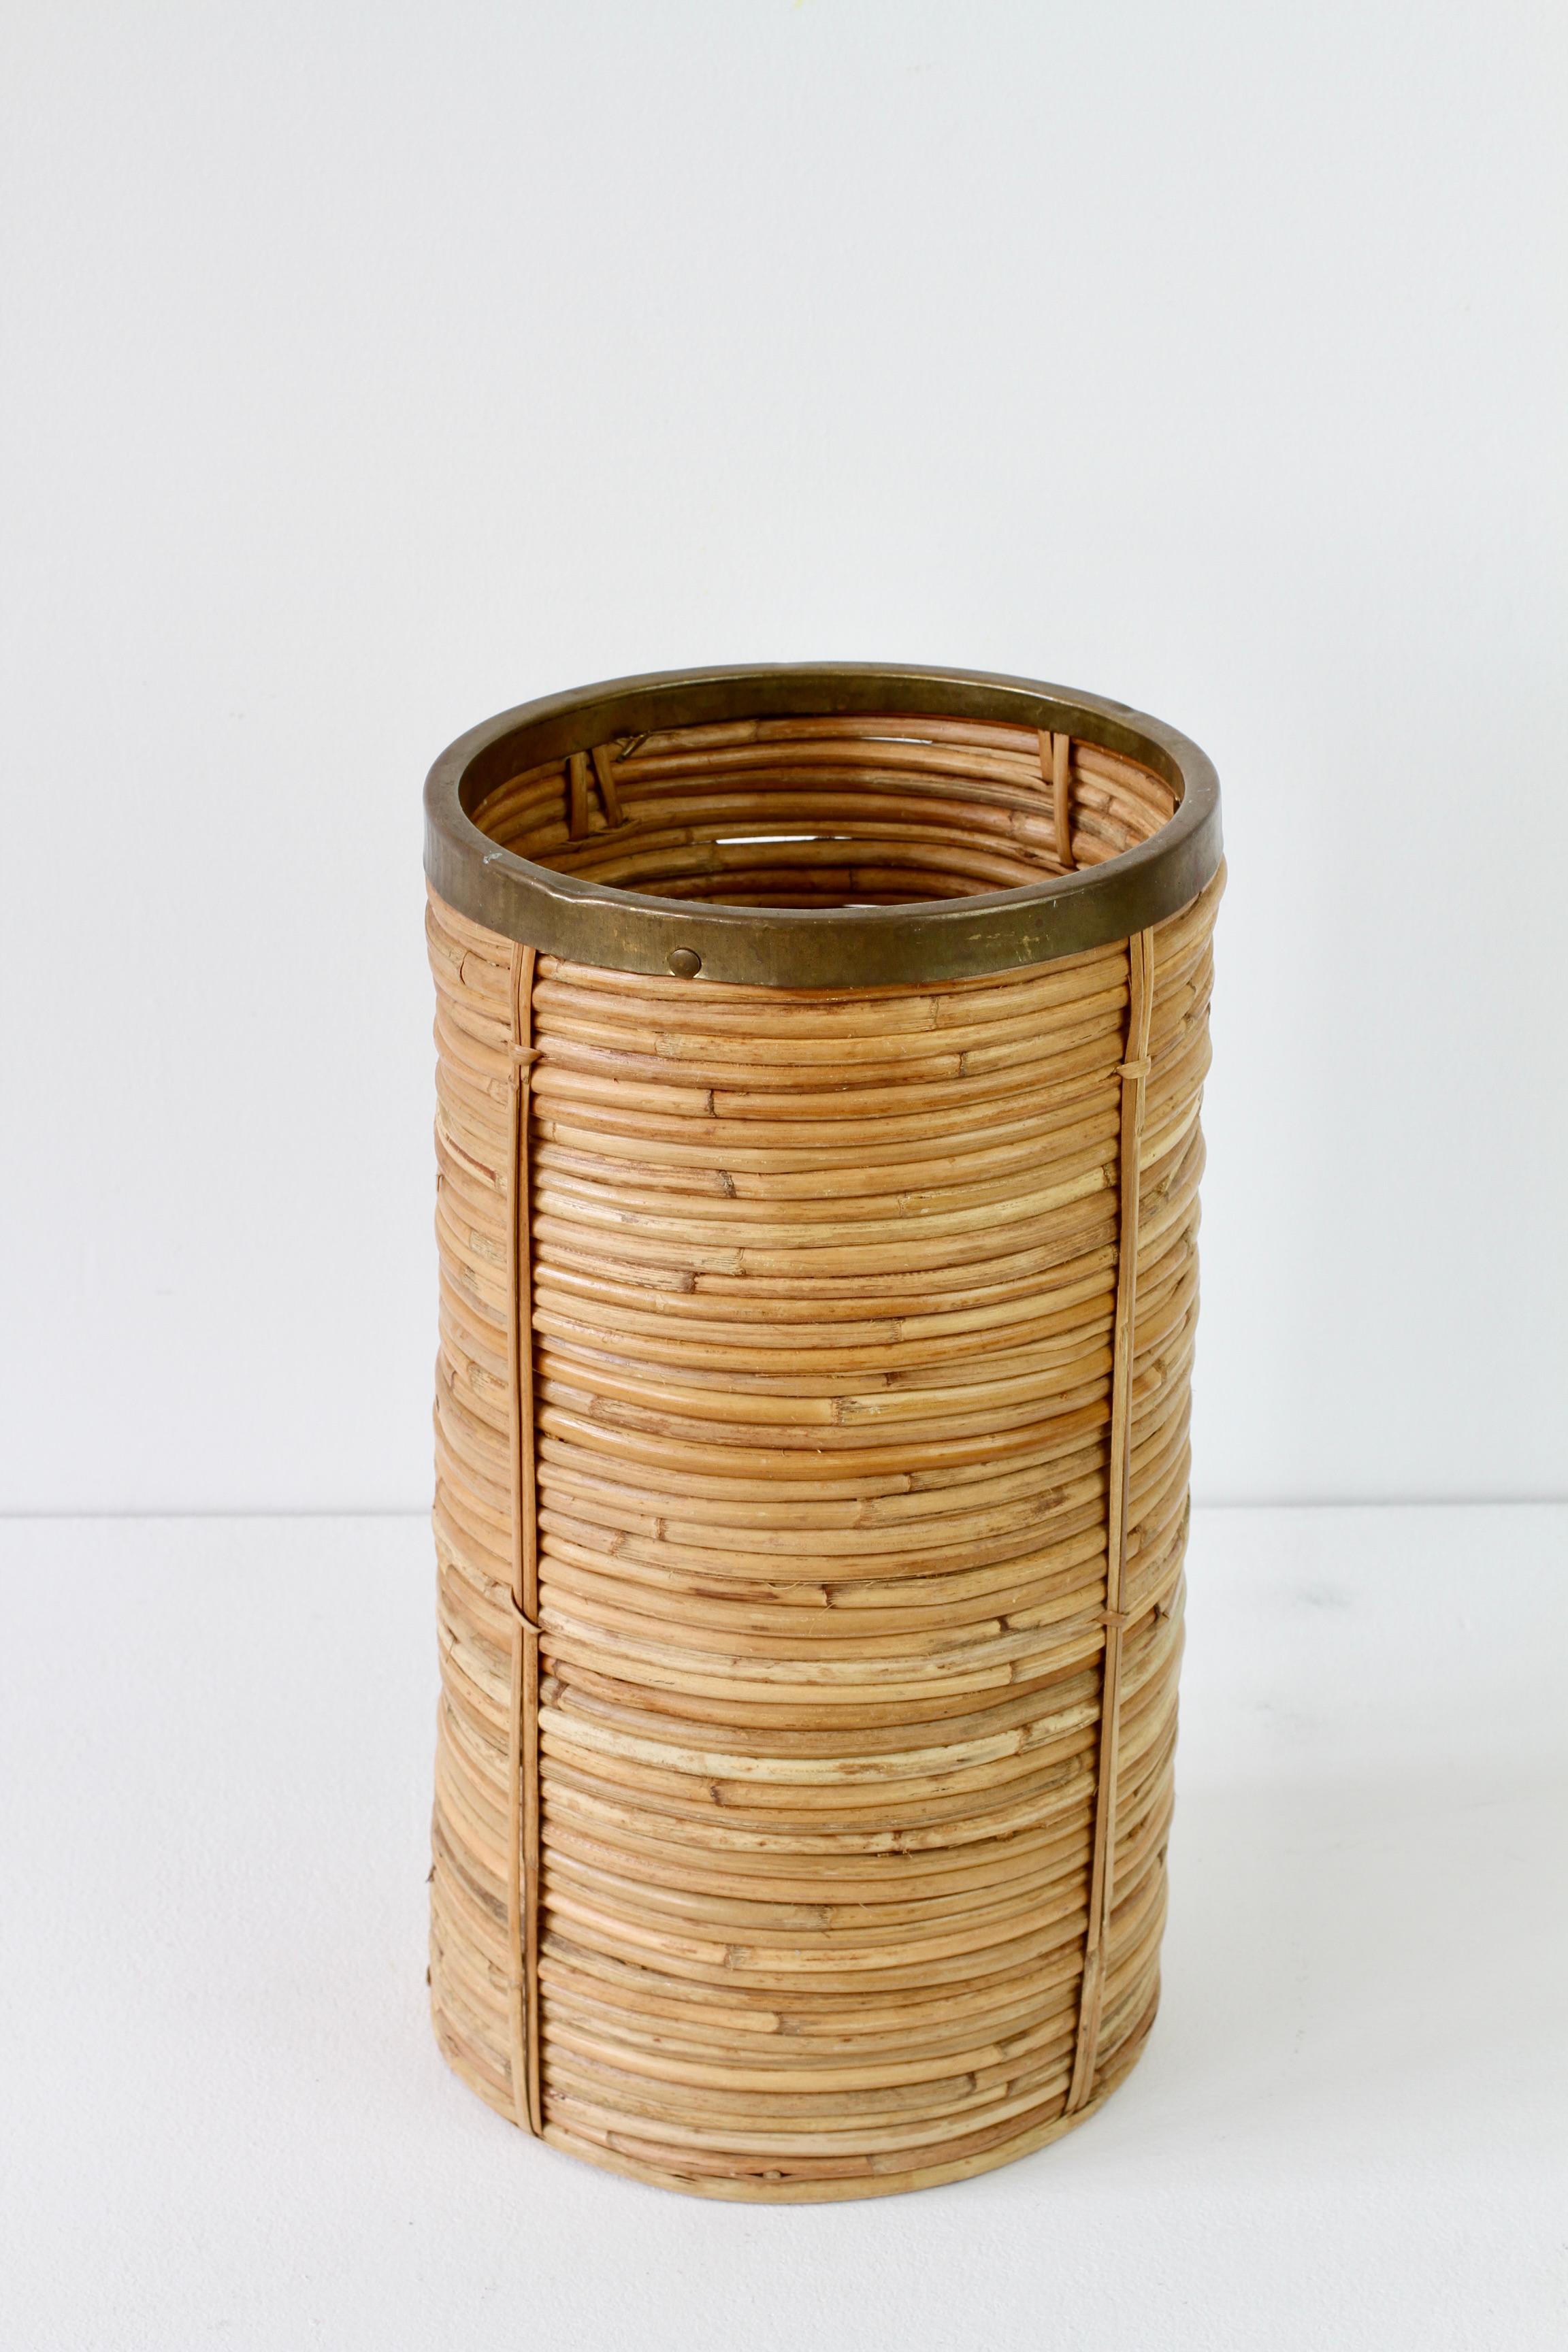 20th Century 1970s Vintage Mid-Century Italian Bamboo Waste Paper Basket or Umbrella Stand